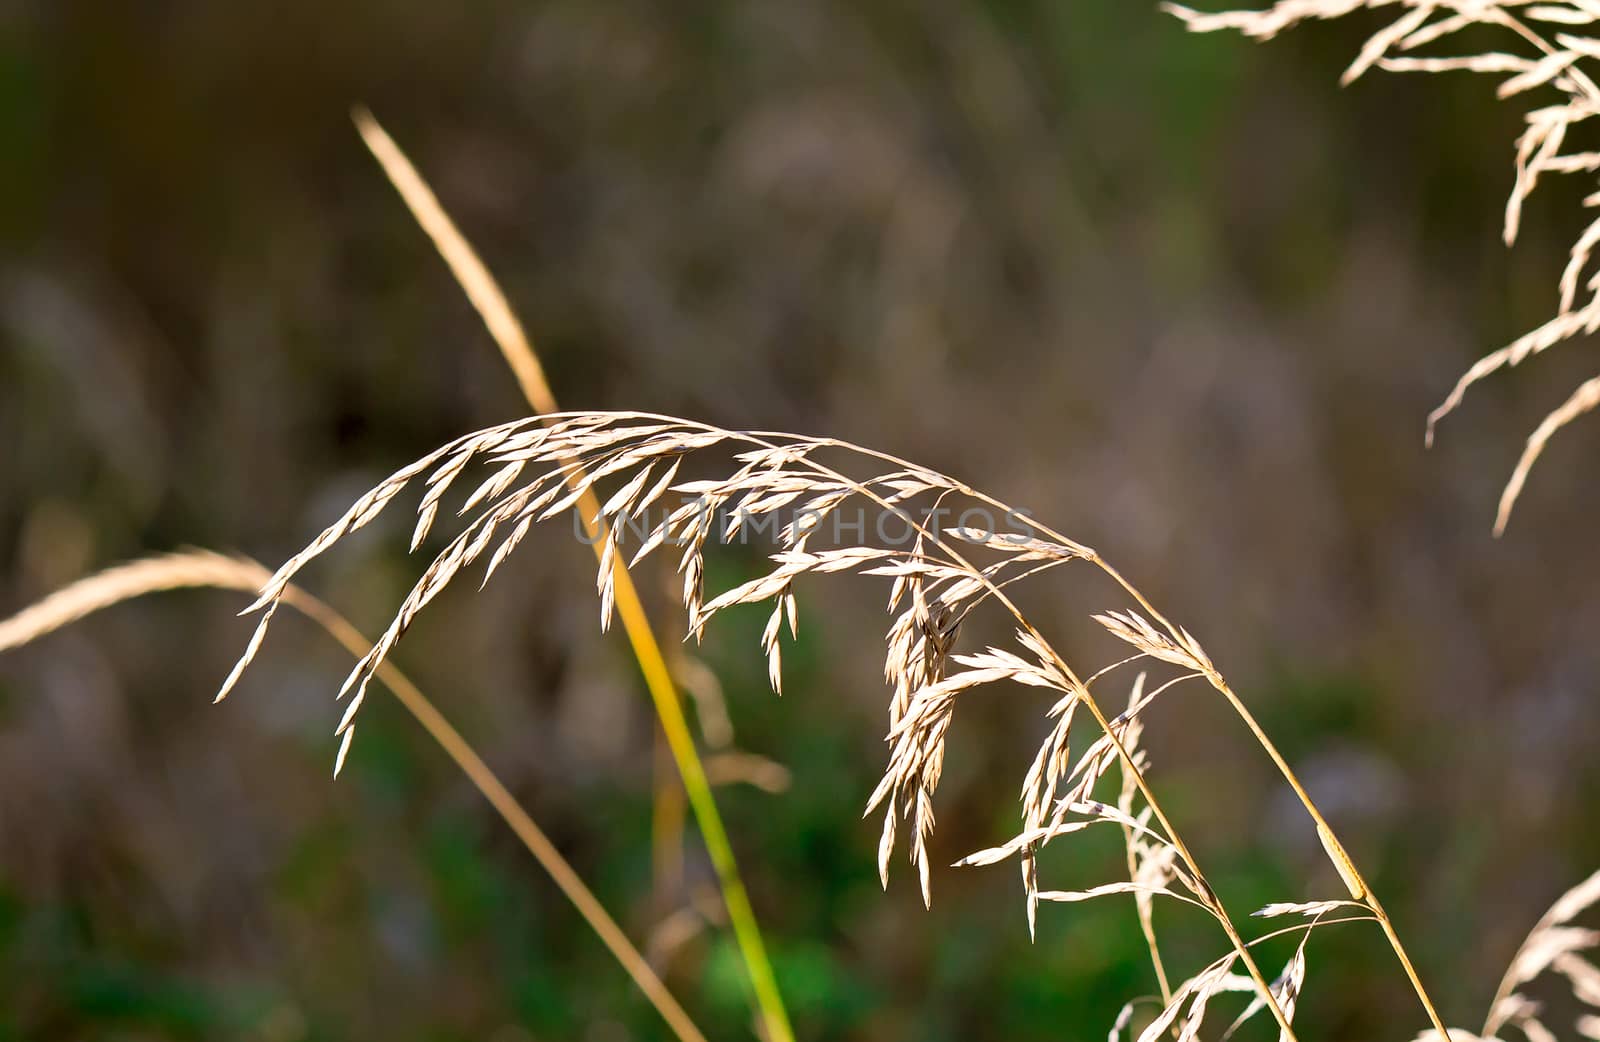 Autumn landscape : the stems of dried grass on a dark green background.